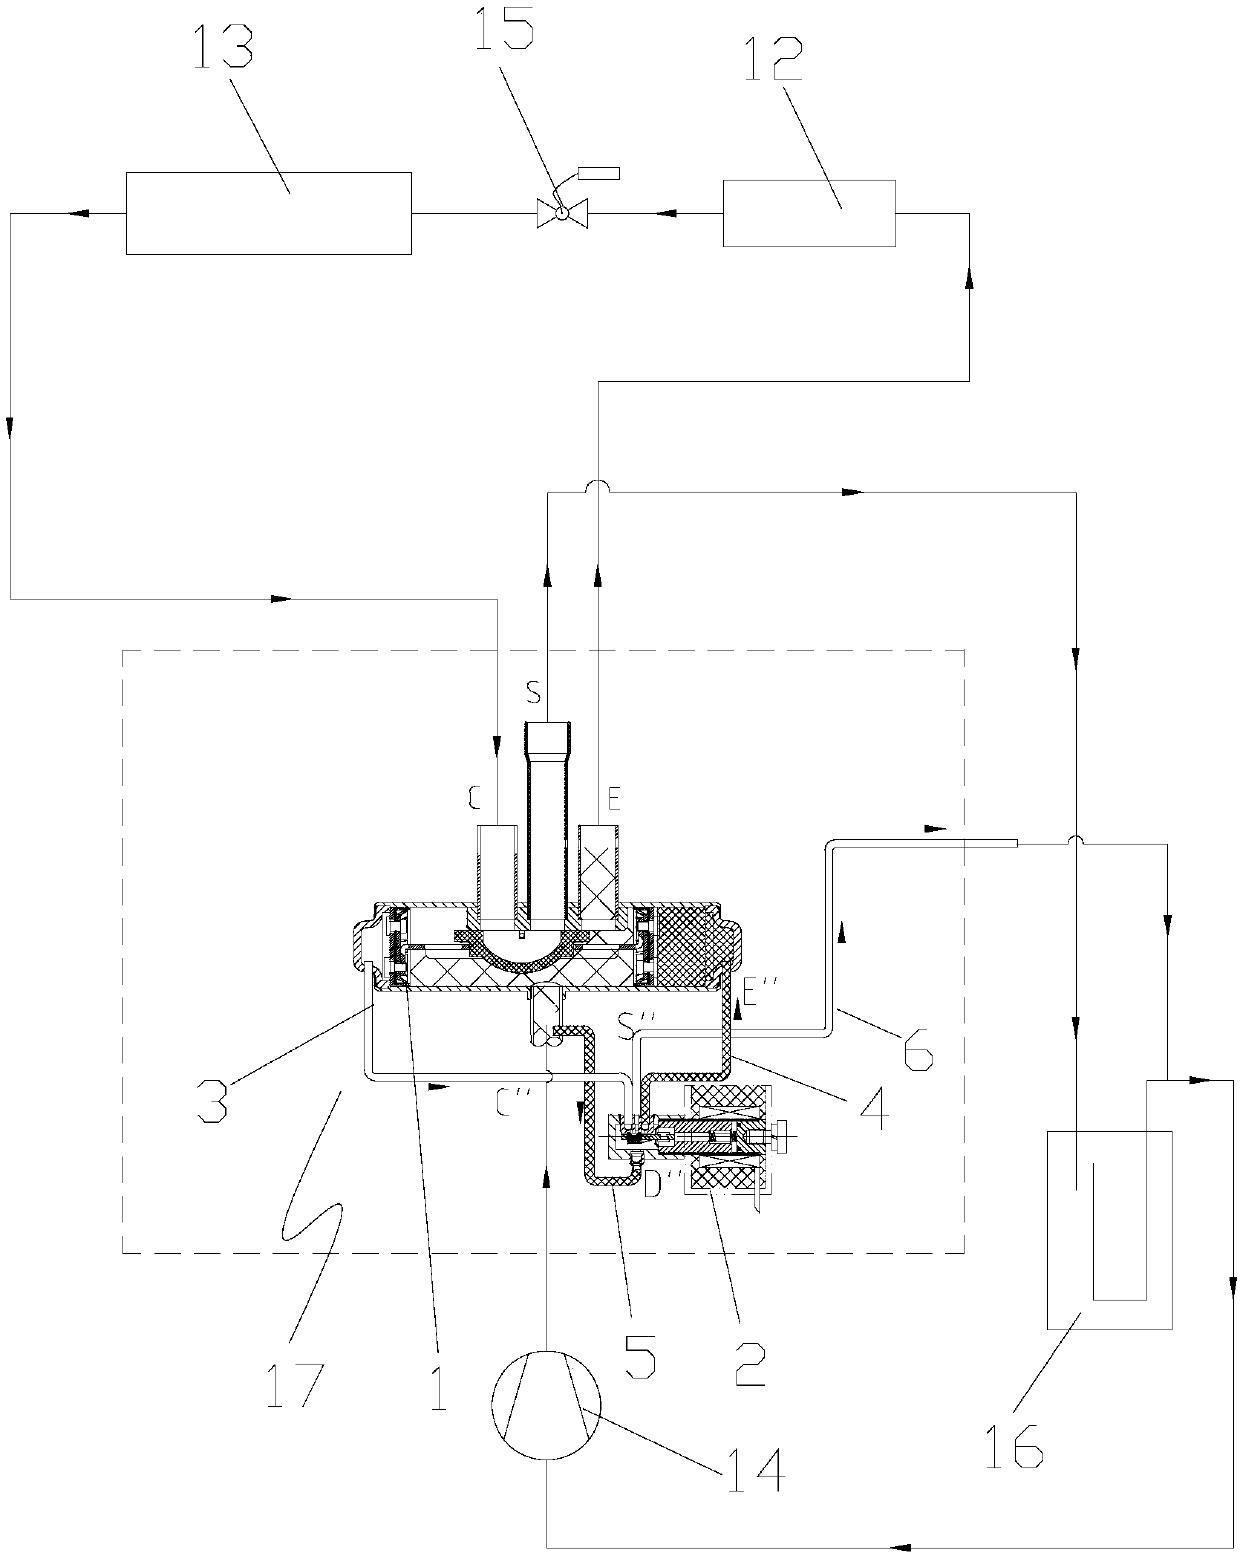 Four-way valve and air conditioning system